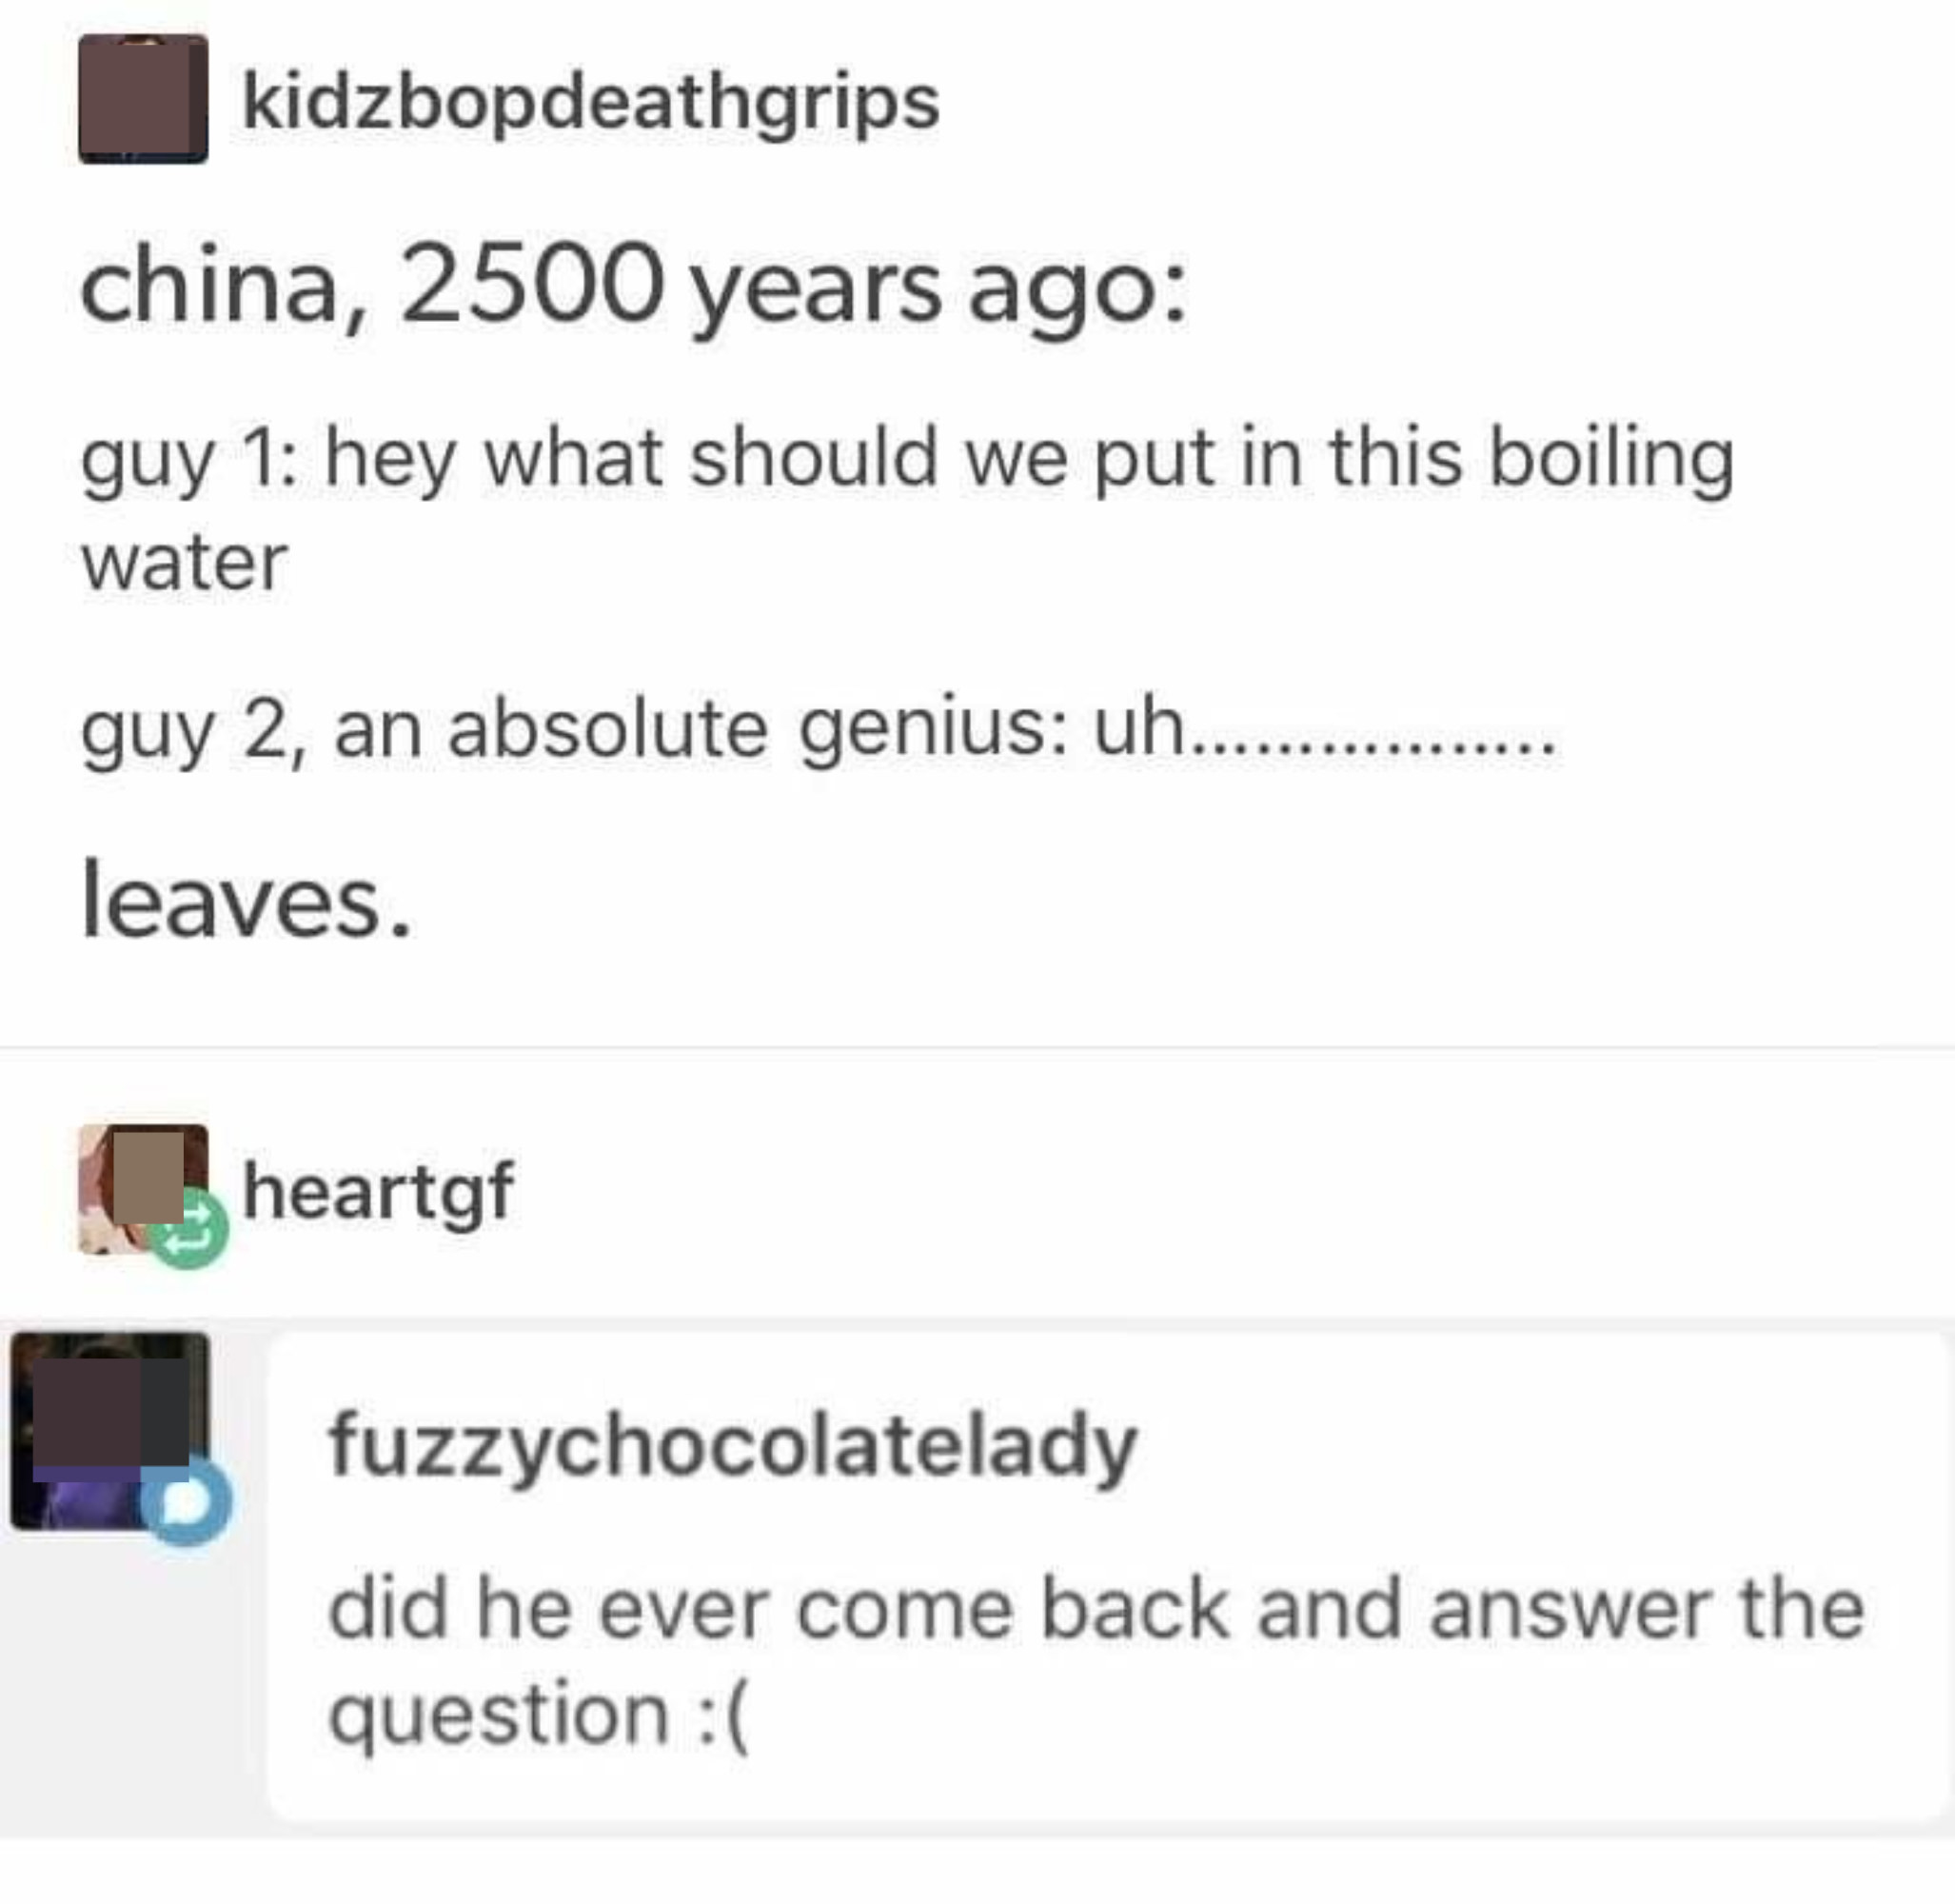 Someone makes a pun about leaves: China, 2,500 years ago: &quot;What should we put in this boiling water?&quot; Answer: &quot;Leaves&quot;; Question: &quot;Did he ever come back and answer the question?&quot;